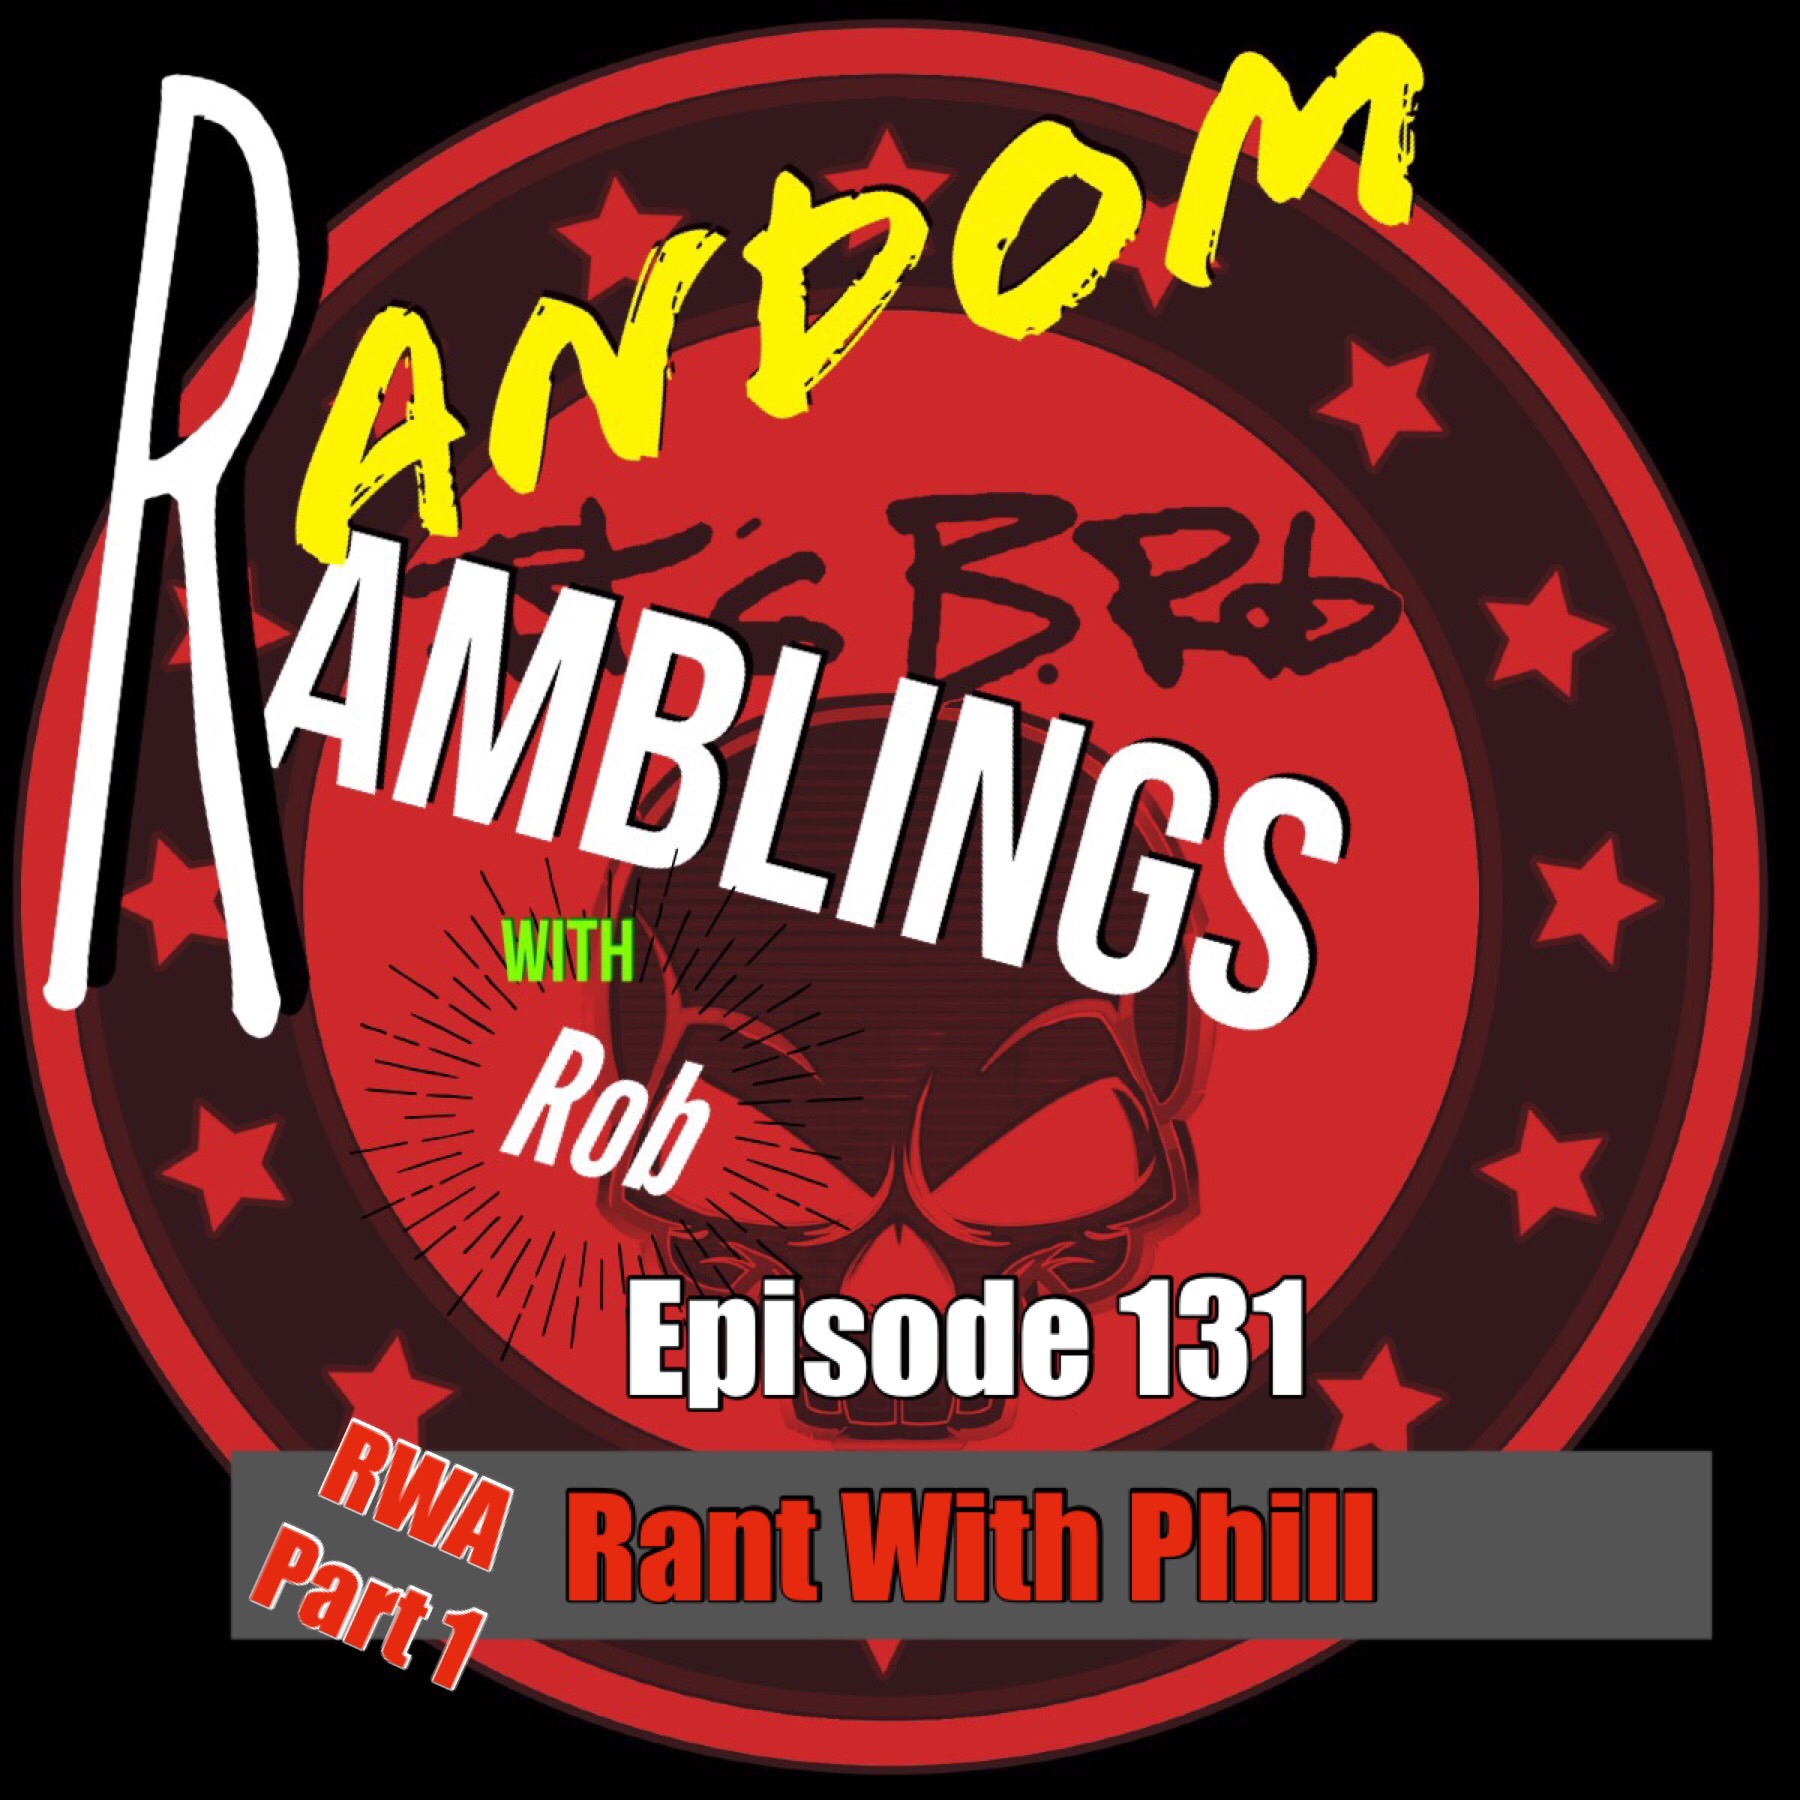 RWA Part 1: Rant With Phill